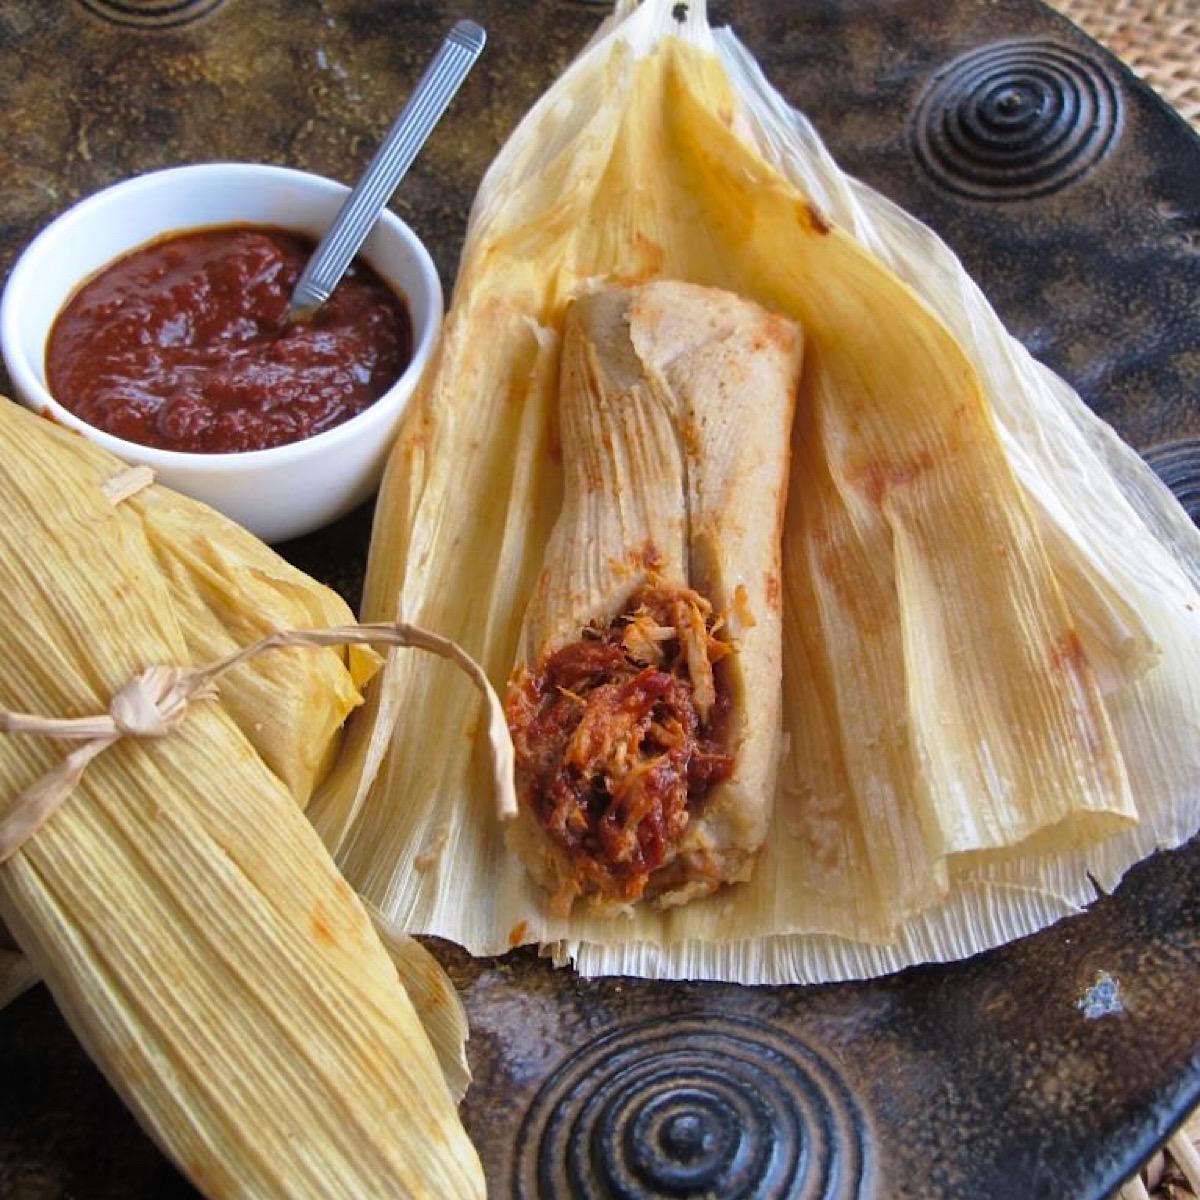 Open tamale showing the inside filling